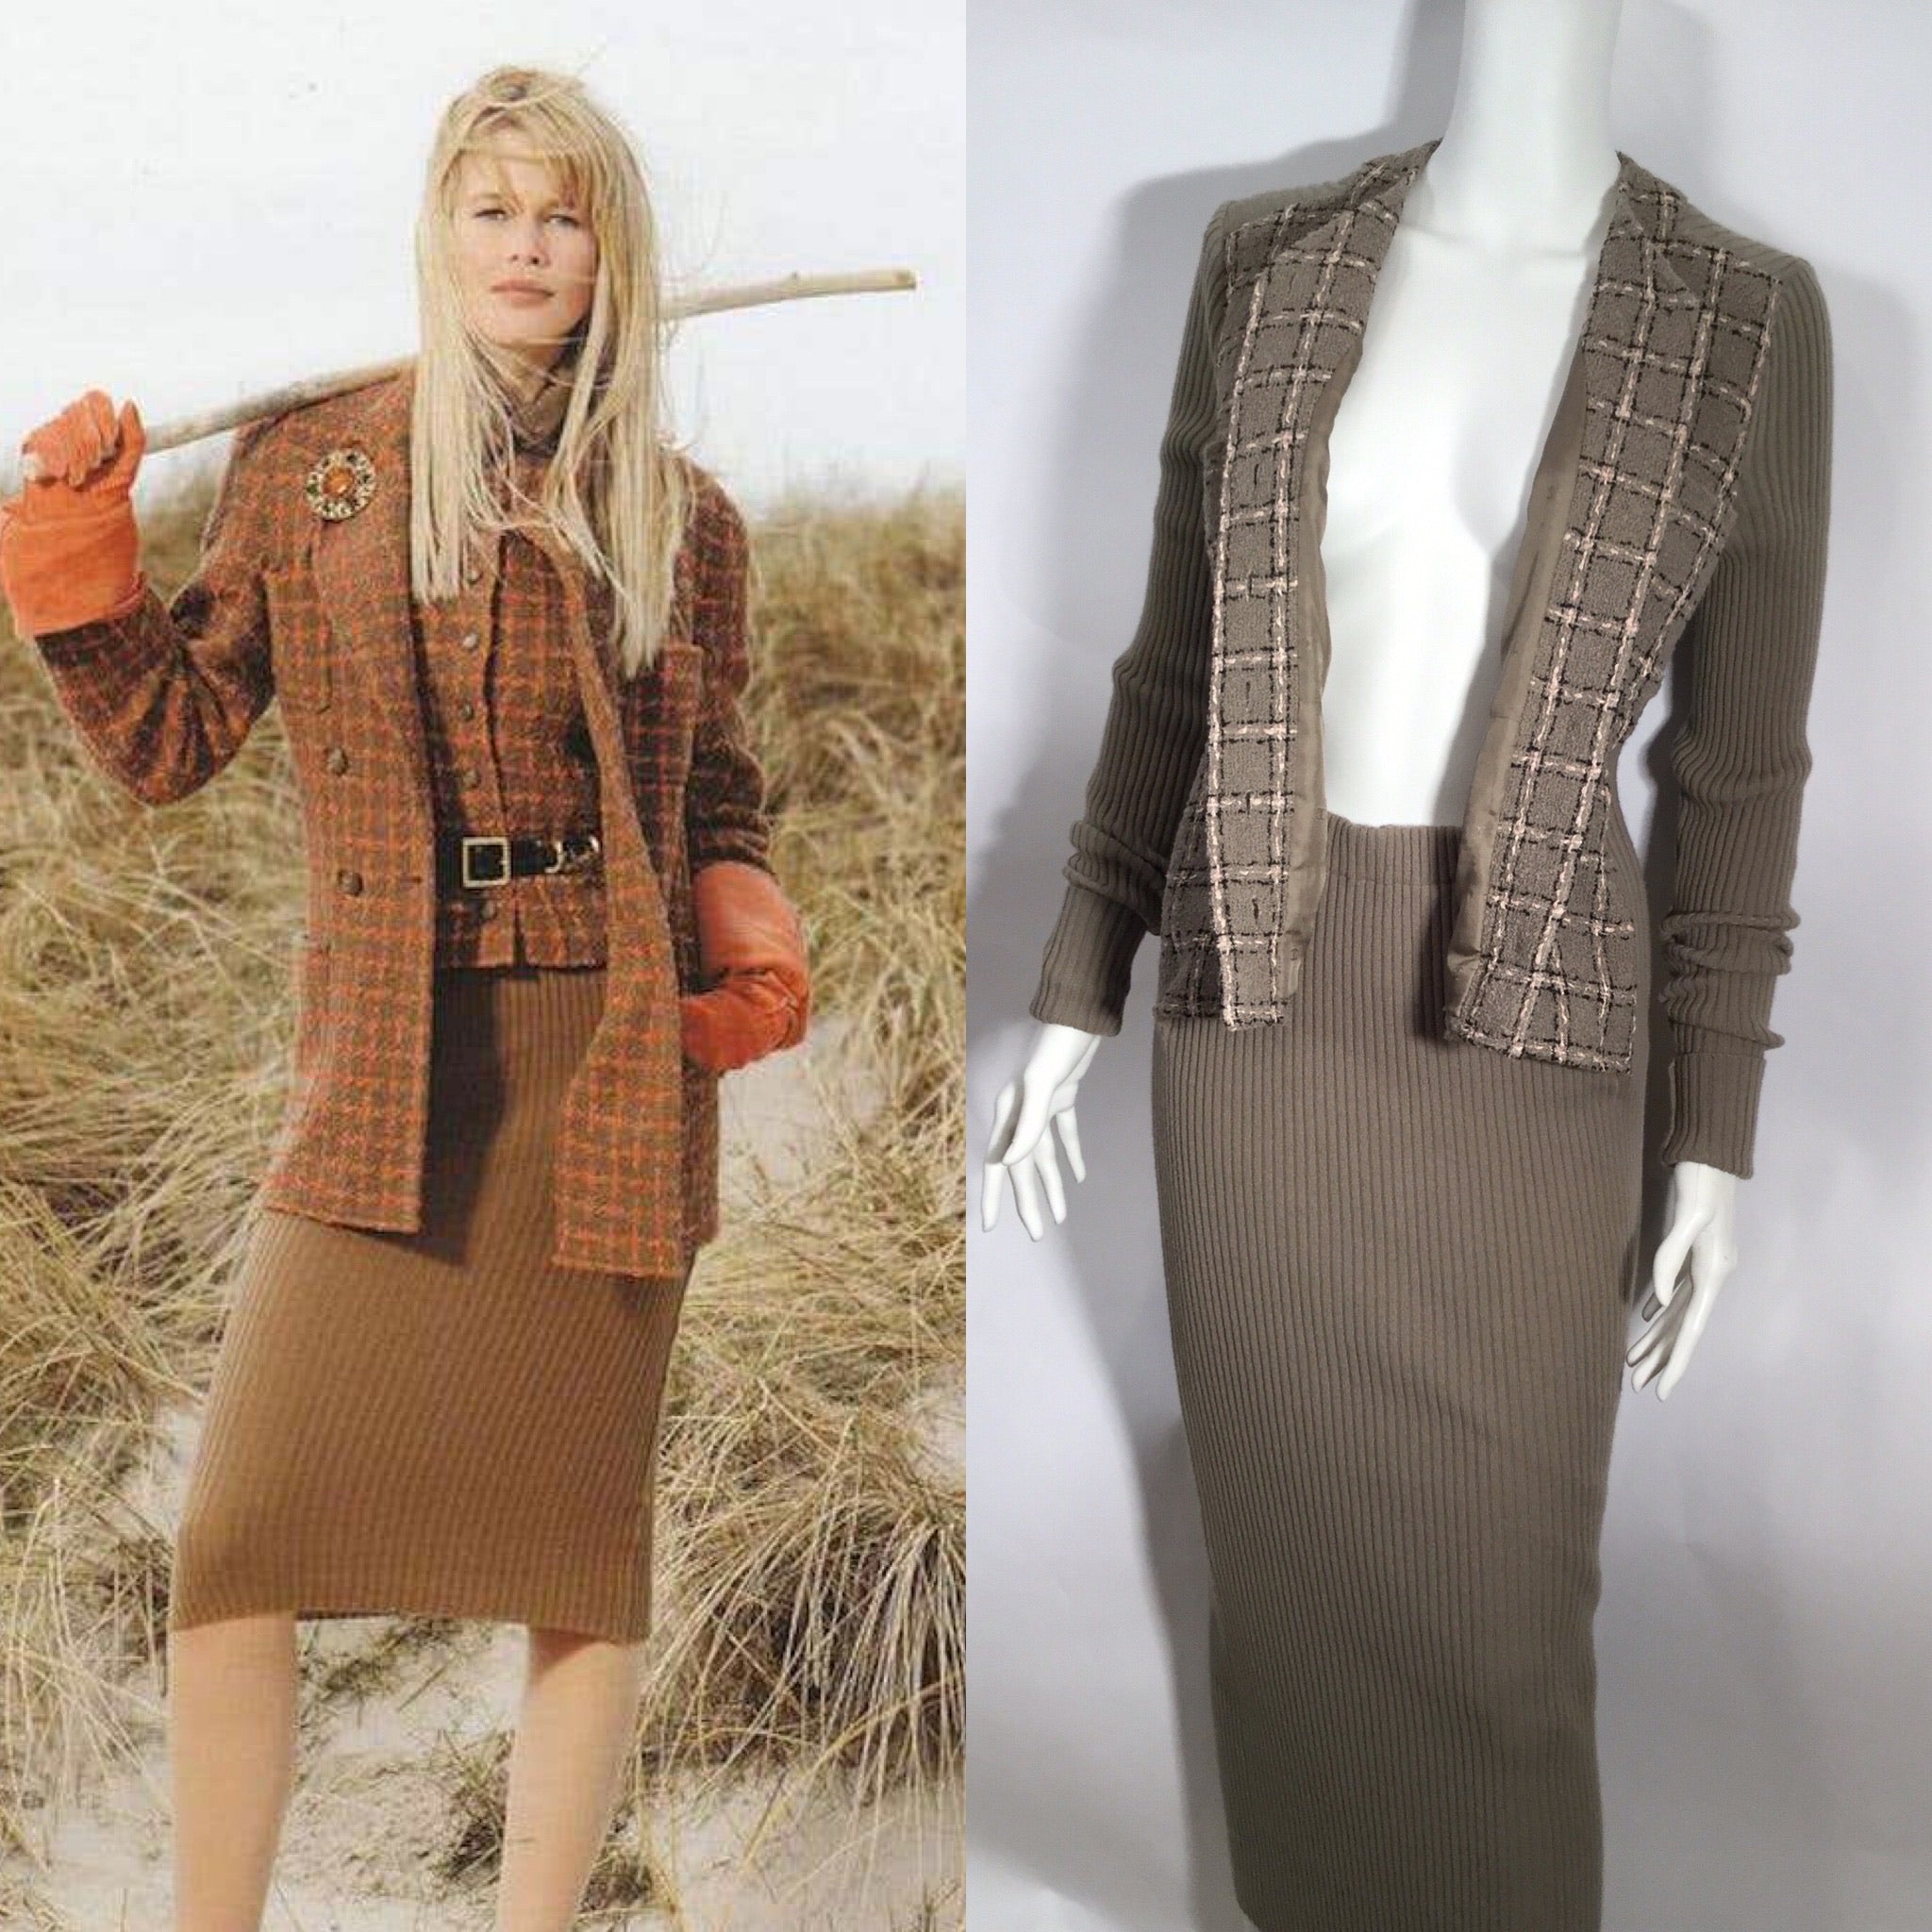 HelensChanel 95A, 1995 Fall Rare Vintage Chanel Knit Dress Attached Tweed Boucle Jacket FR 40 US 4